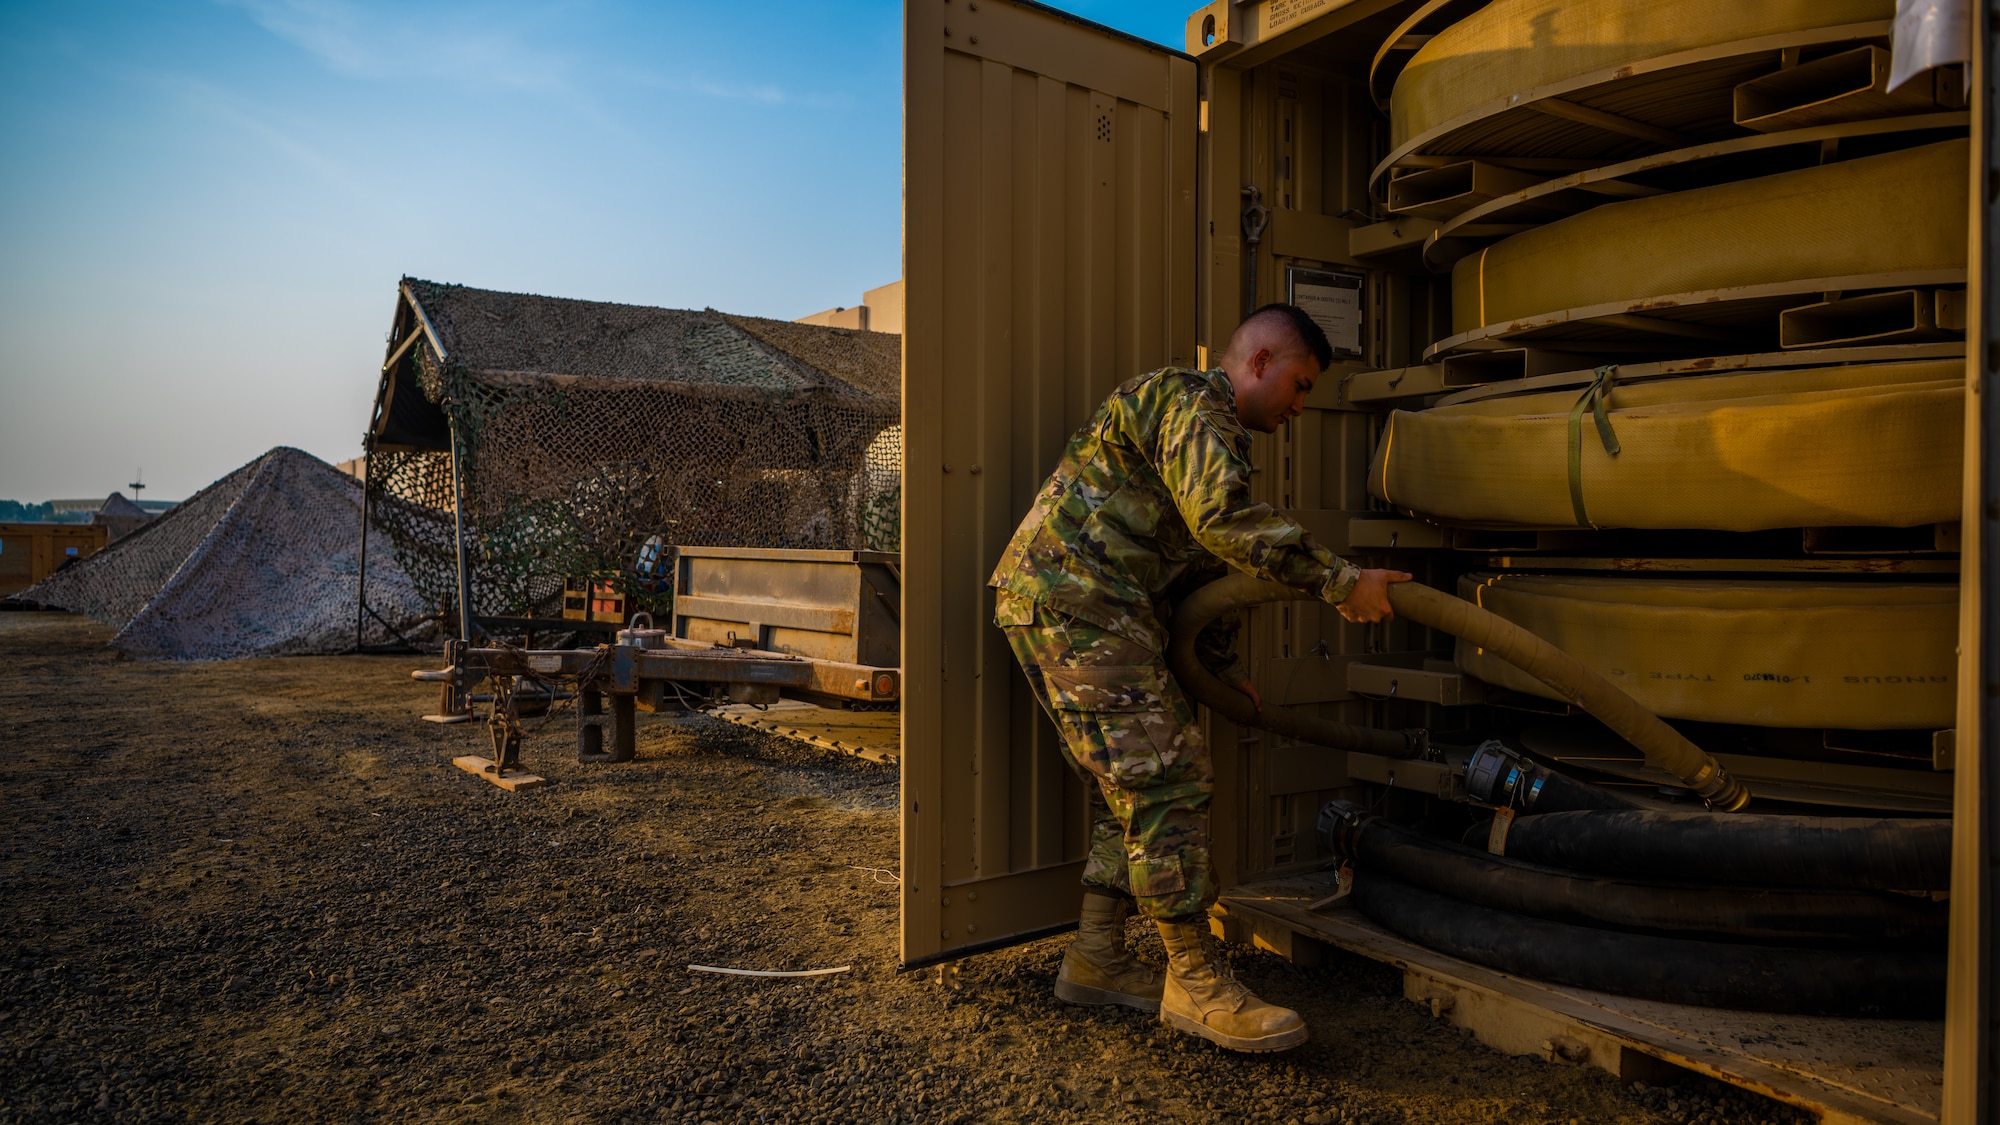 During their deployment rotation, the 380th Expeditionary Logistics Readiness Squadron Fuels Flight oversaw the throughput of 86.5 million gallons, maintaining the Department of Defense’s largest tactical fuel site.